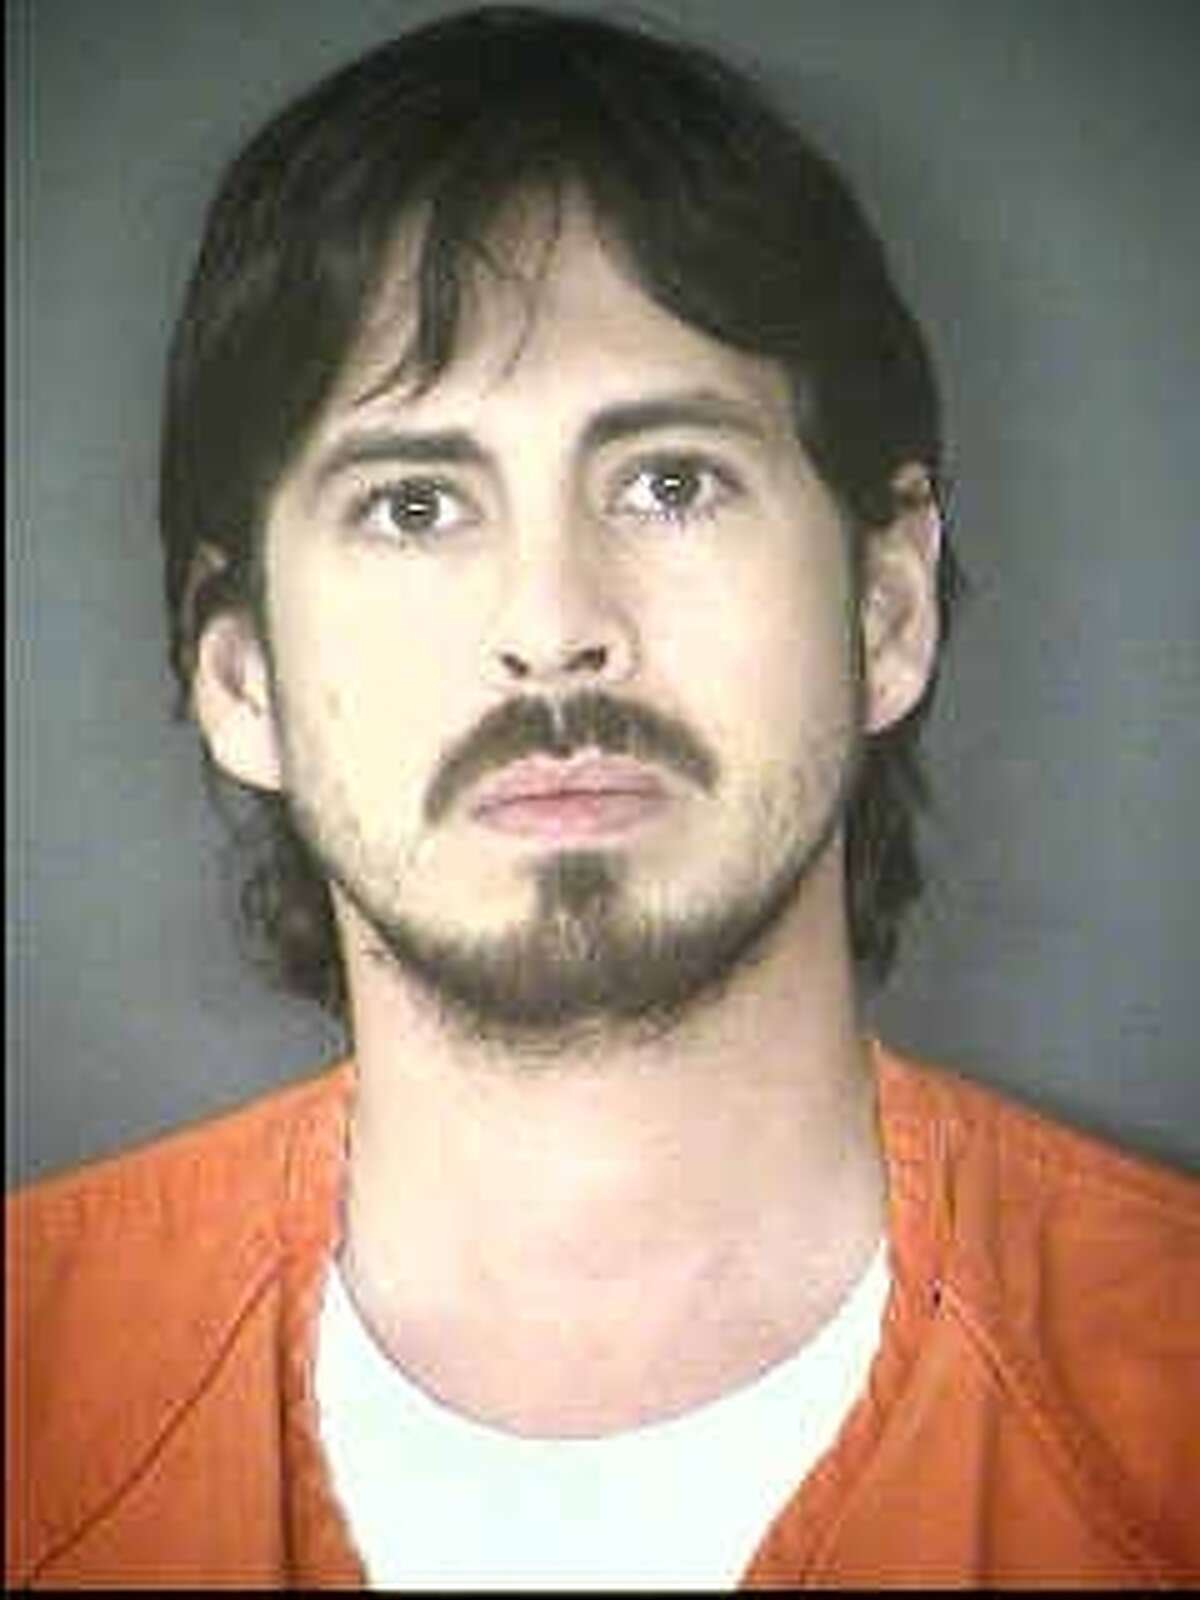 Conrad Ochoa, 31, was arrested Sunday on charges of possession and promotion of child pornography. Recently unsealed arrest warrant affidavits state Ochoa had thousands of images of young girls, scantily clad, in provocative poses; he also had images and a video of his own 10-year-old daughter Samvastion Ochoa engaged in sexual activity with another young girl. The affidavits indicate both Conrad and his brother Baron Ochoa are being treated as suspects in the deaths of Conrad Ochoa's daughter, 10-year-old Samvastion Ochoa; her mother Rebecca Gonzales and Gonzales' roommate and friend, Pamela Wenske.